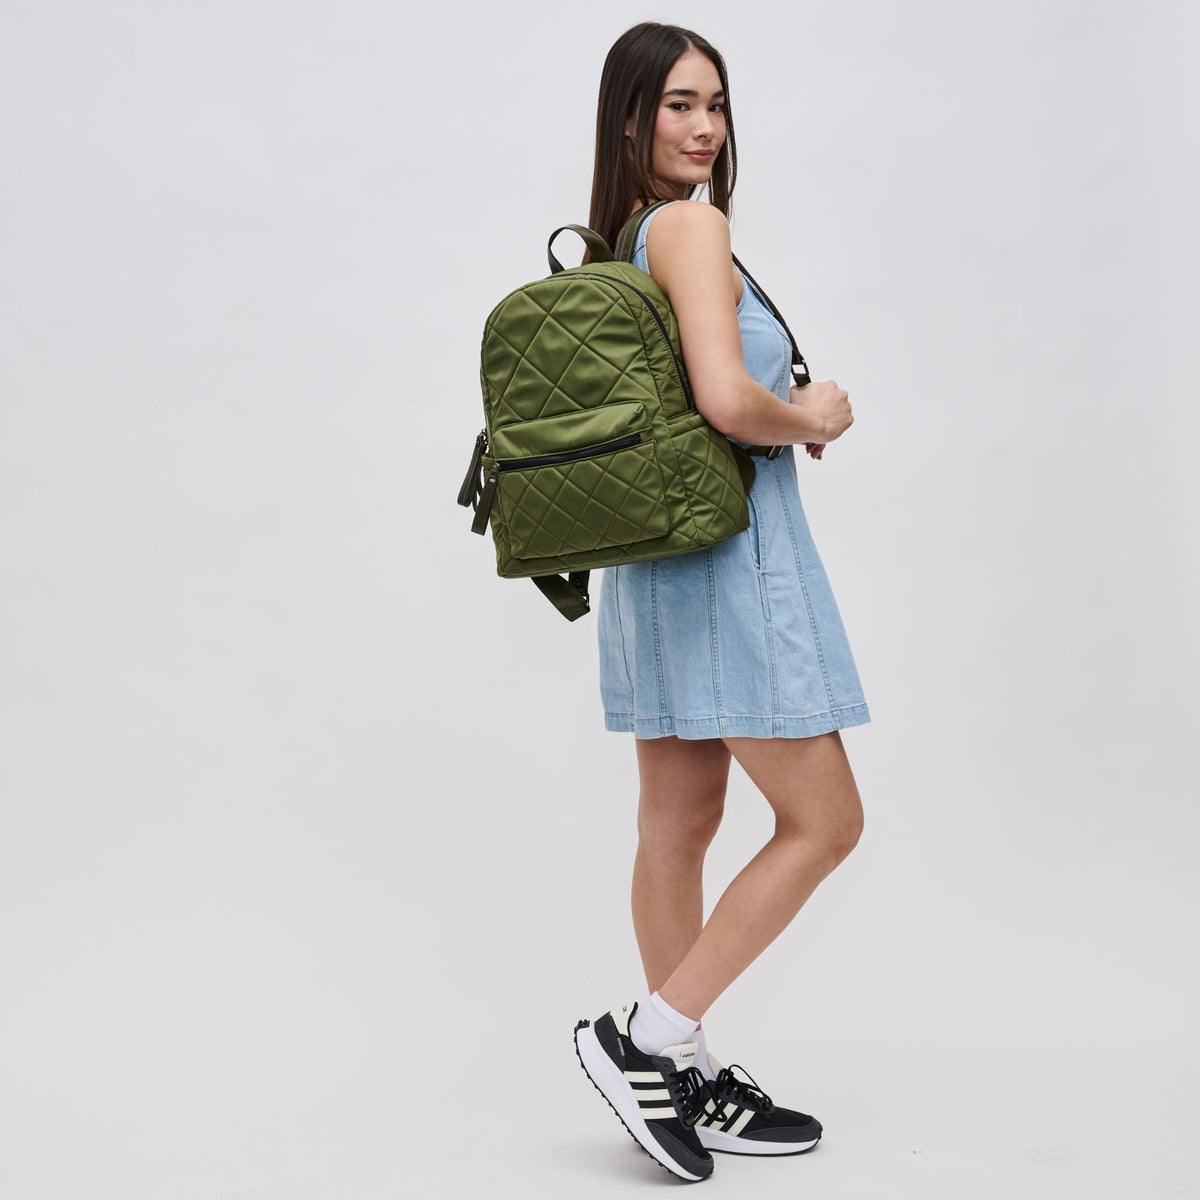 Woman wearing Olive Sol and Selene Motivator - Medium Backpack 841764100083 View 3 | Olive